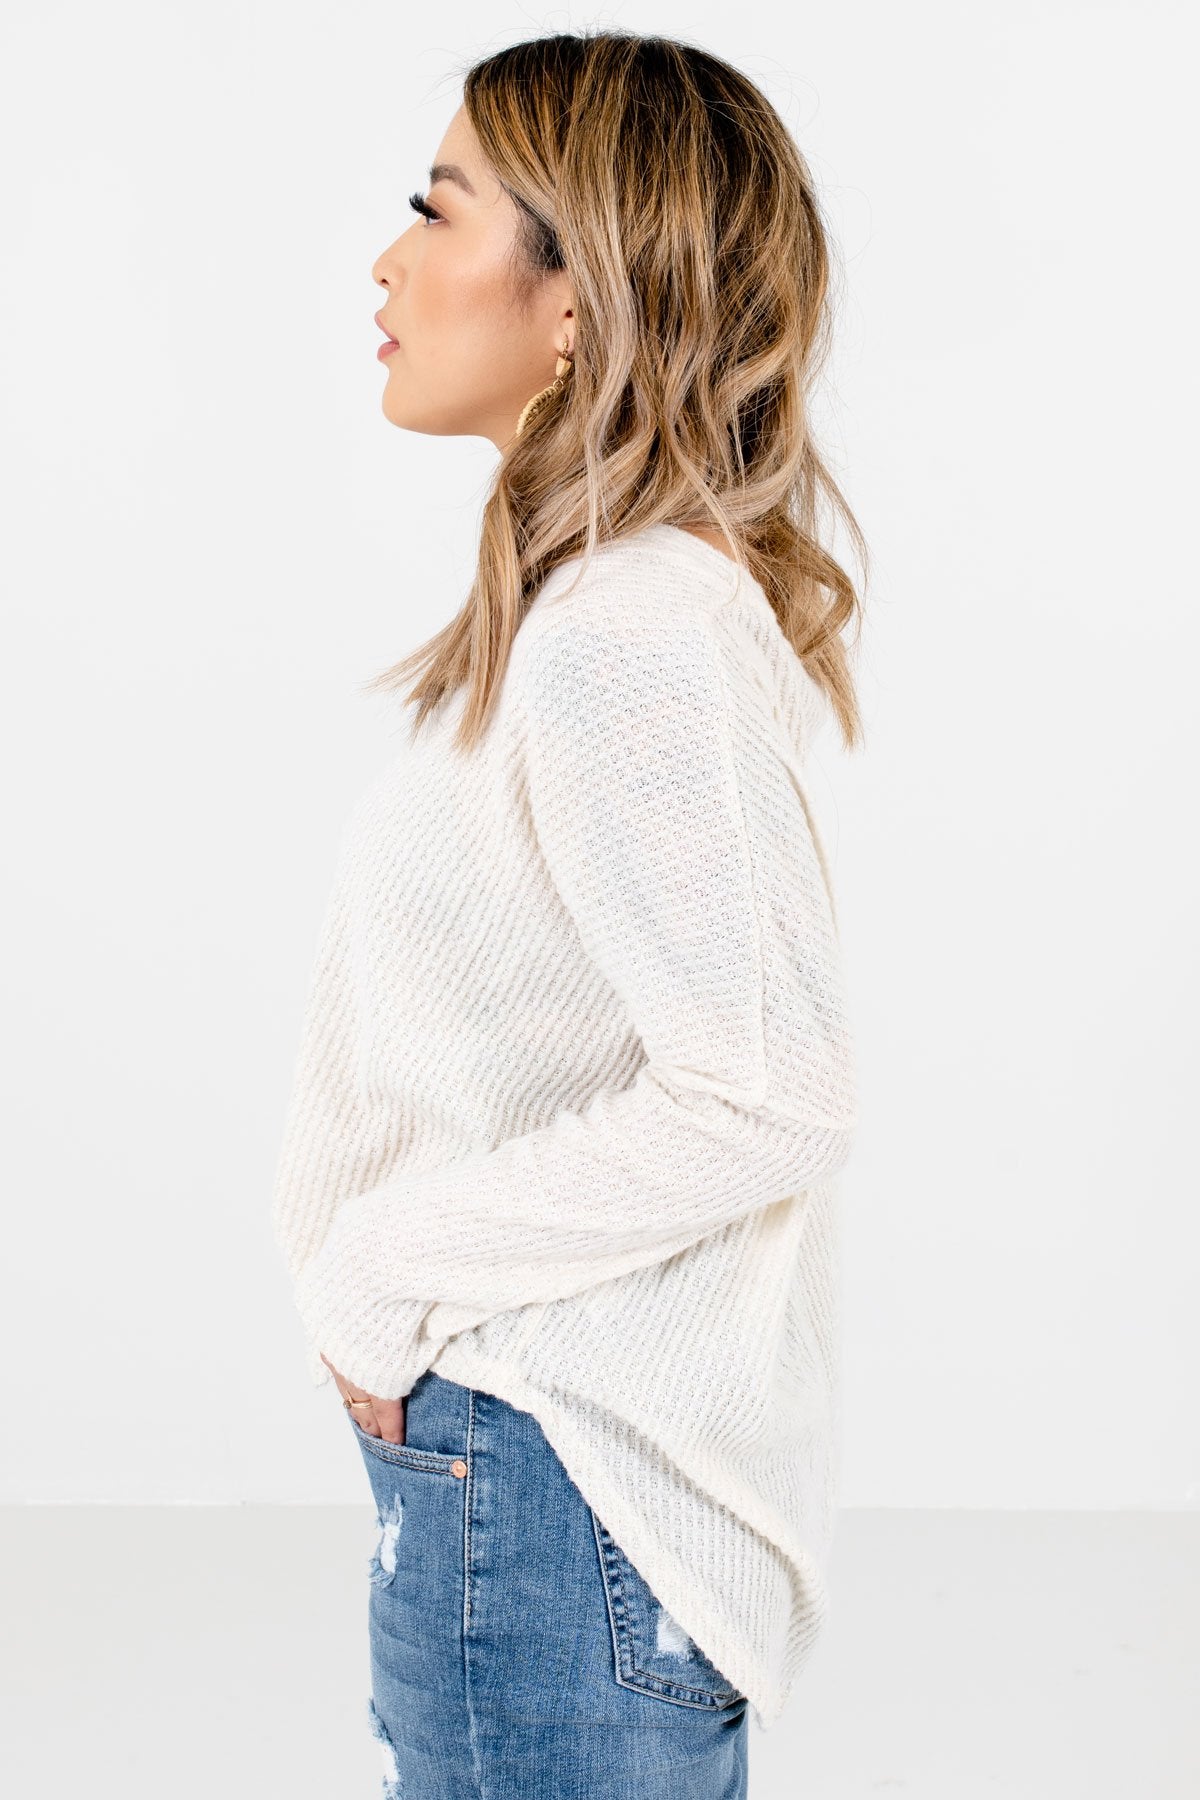 Cream Long Sleeve Boutique Tops for Women